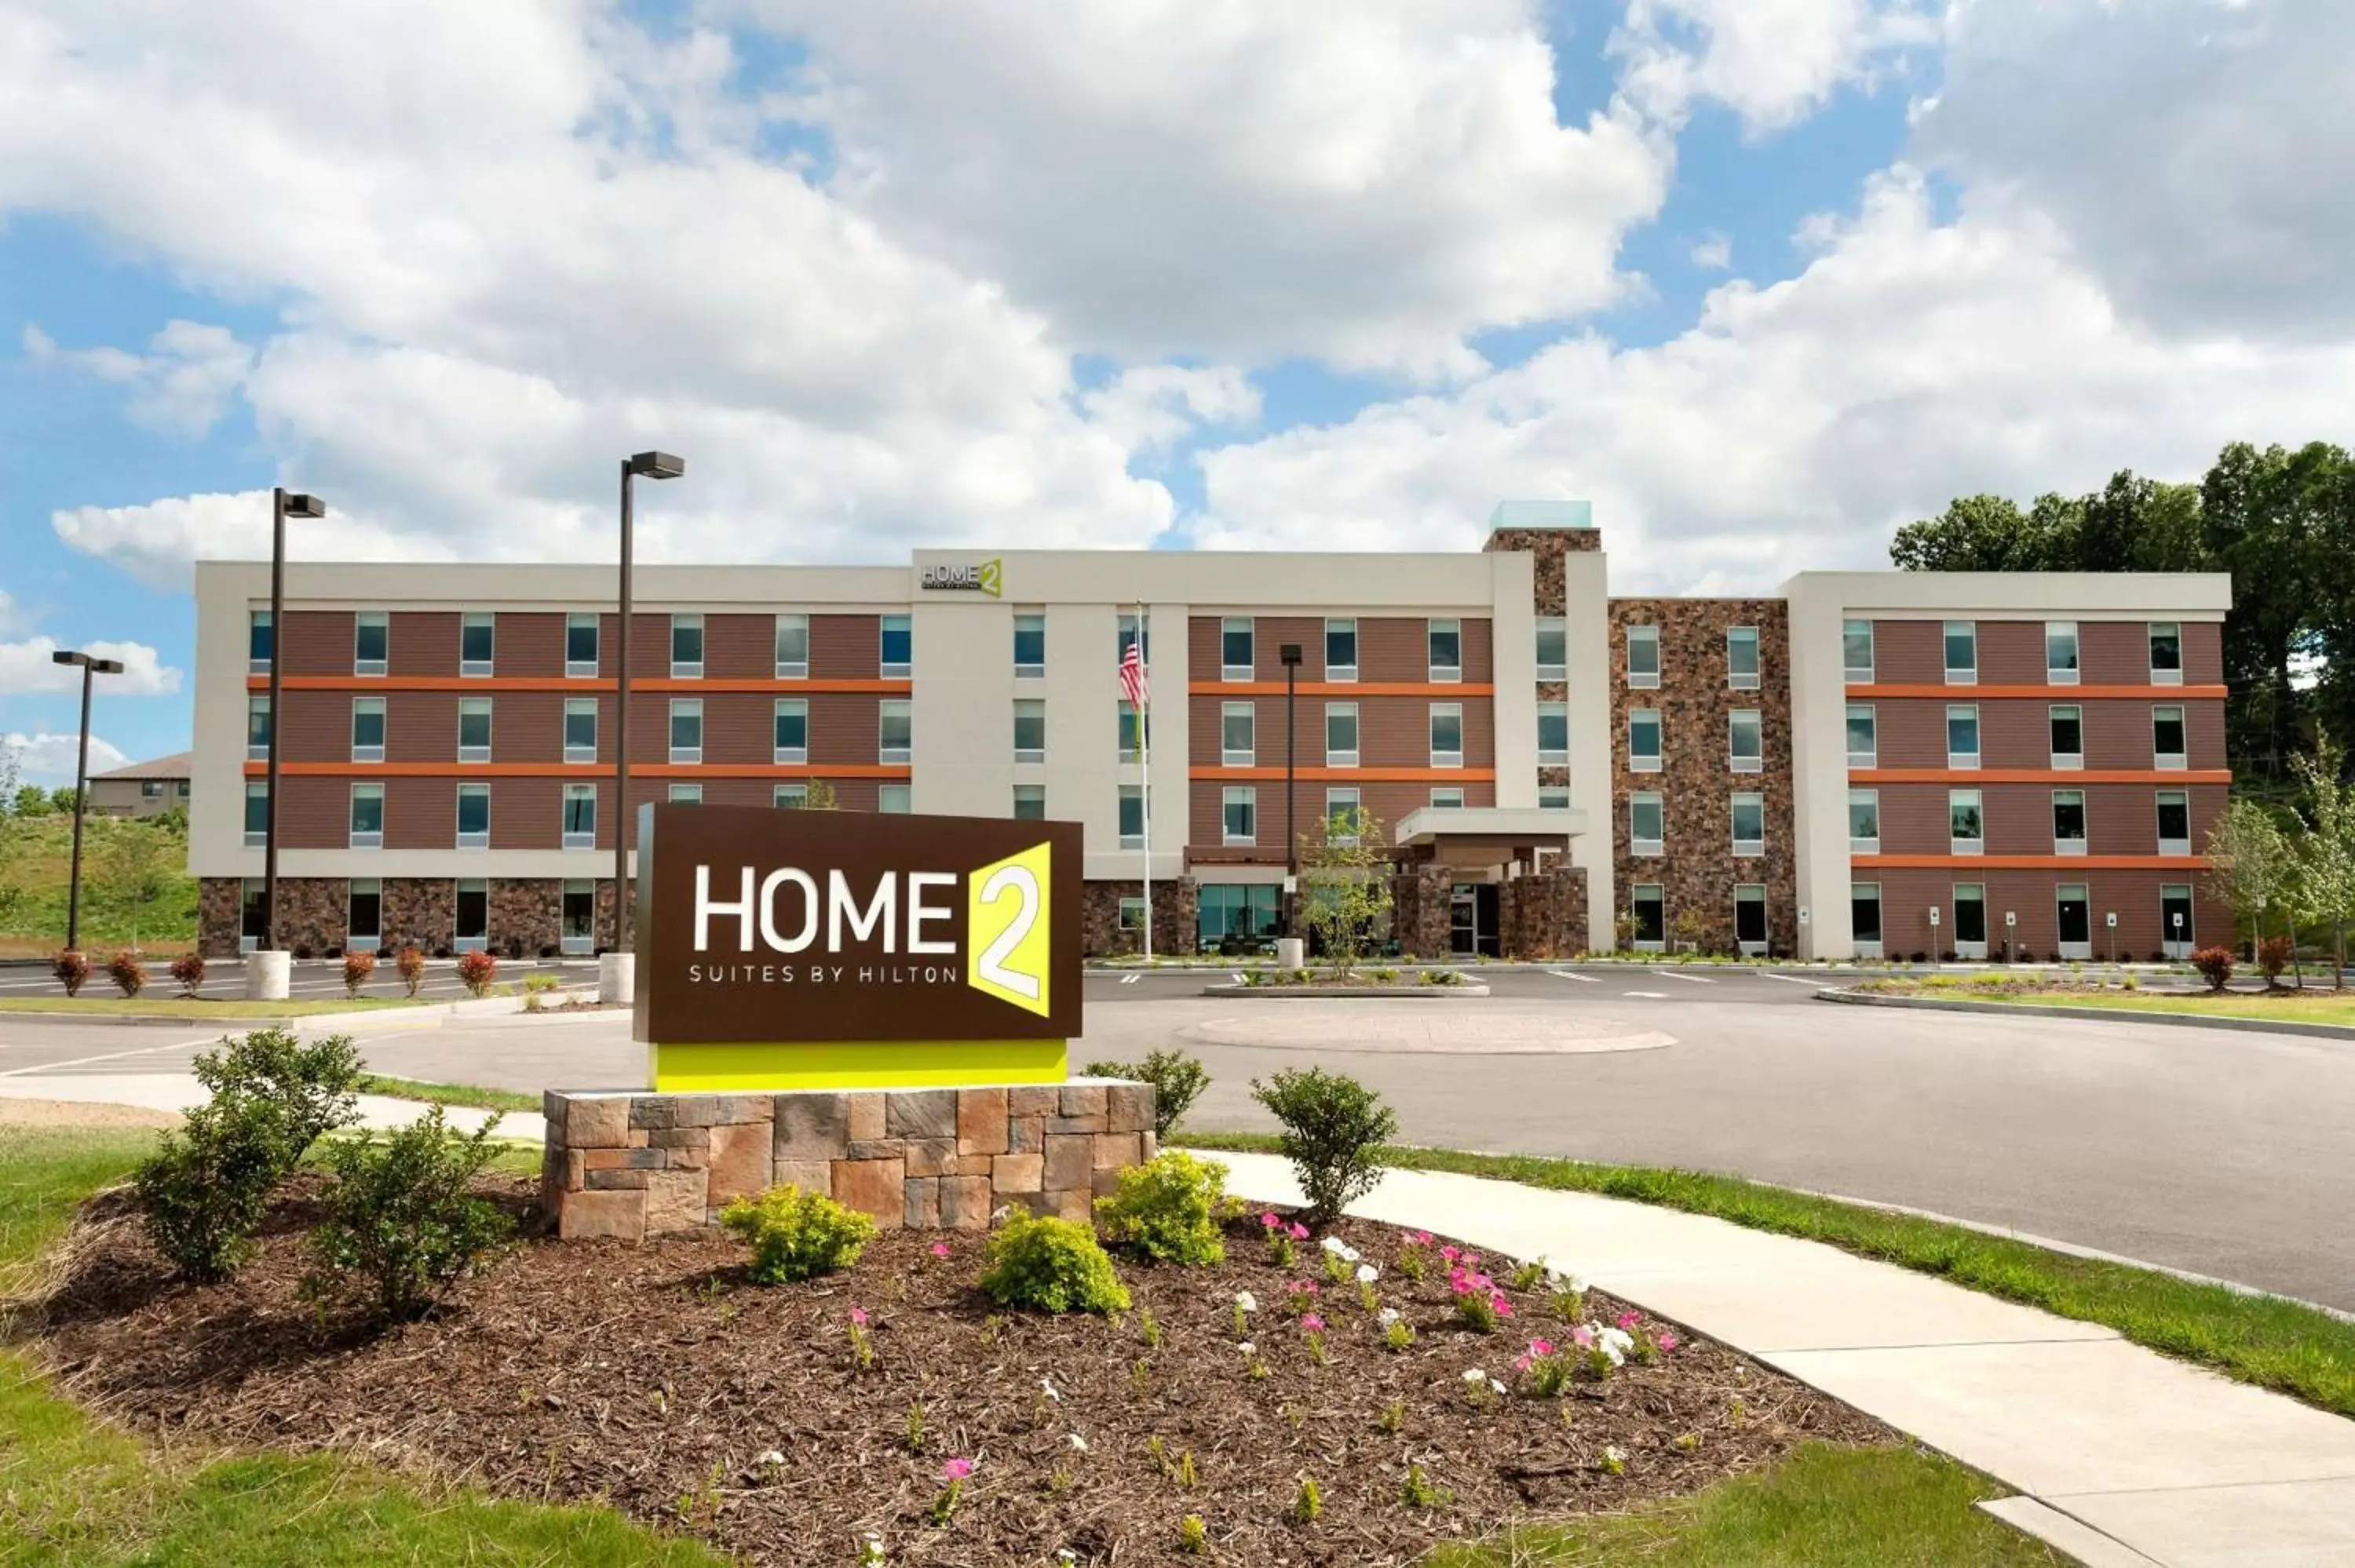 Property Building in Home2 Suites by Hilton Pittsburgh - McCandless, PA